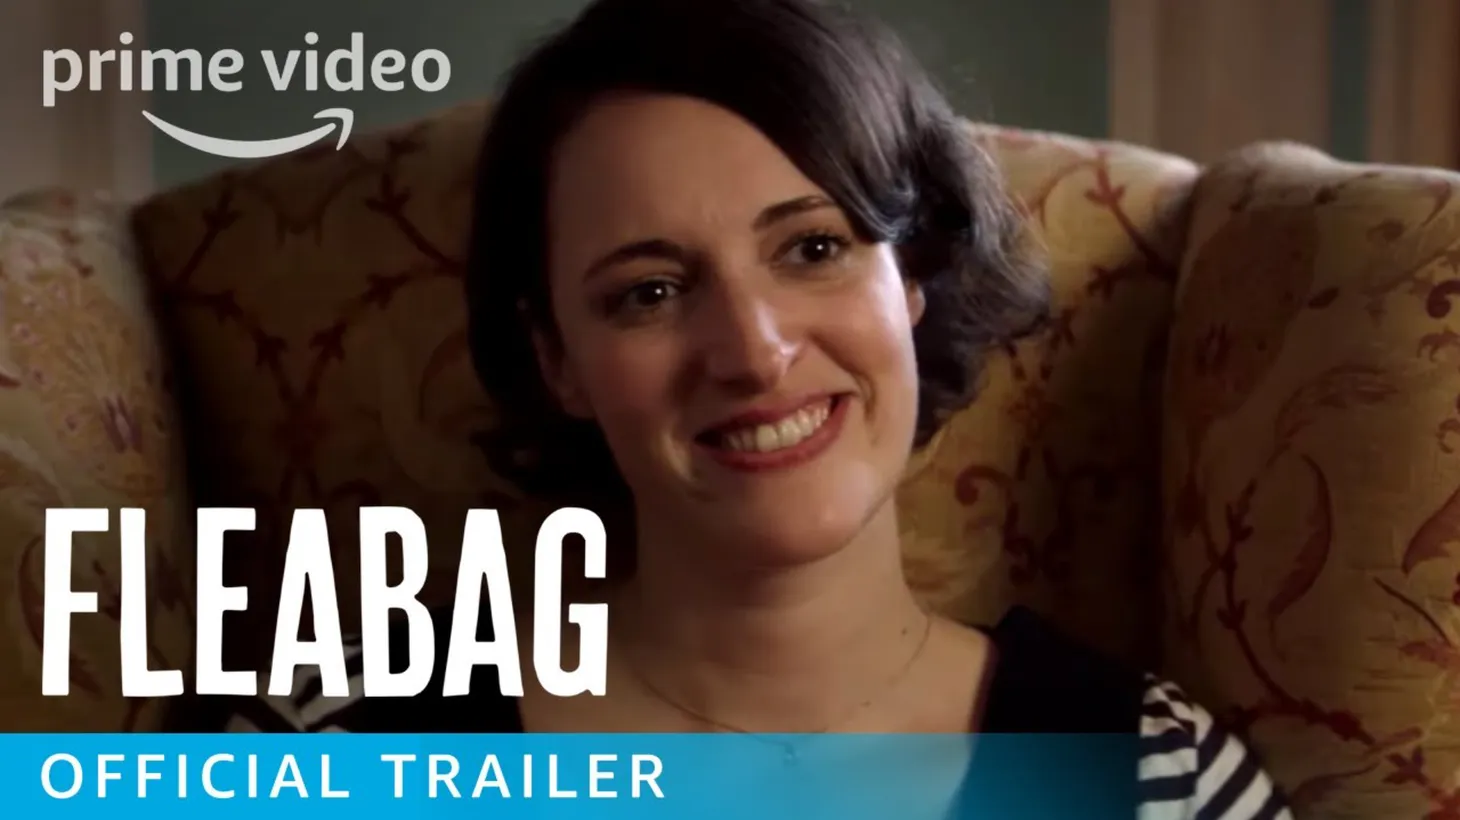 “Fleabag” is a comedy about a London woman with grief, anger, and no filter.